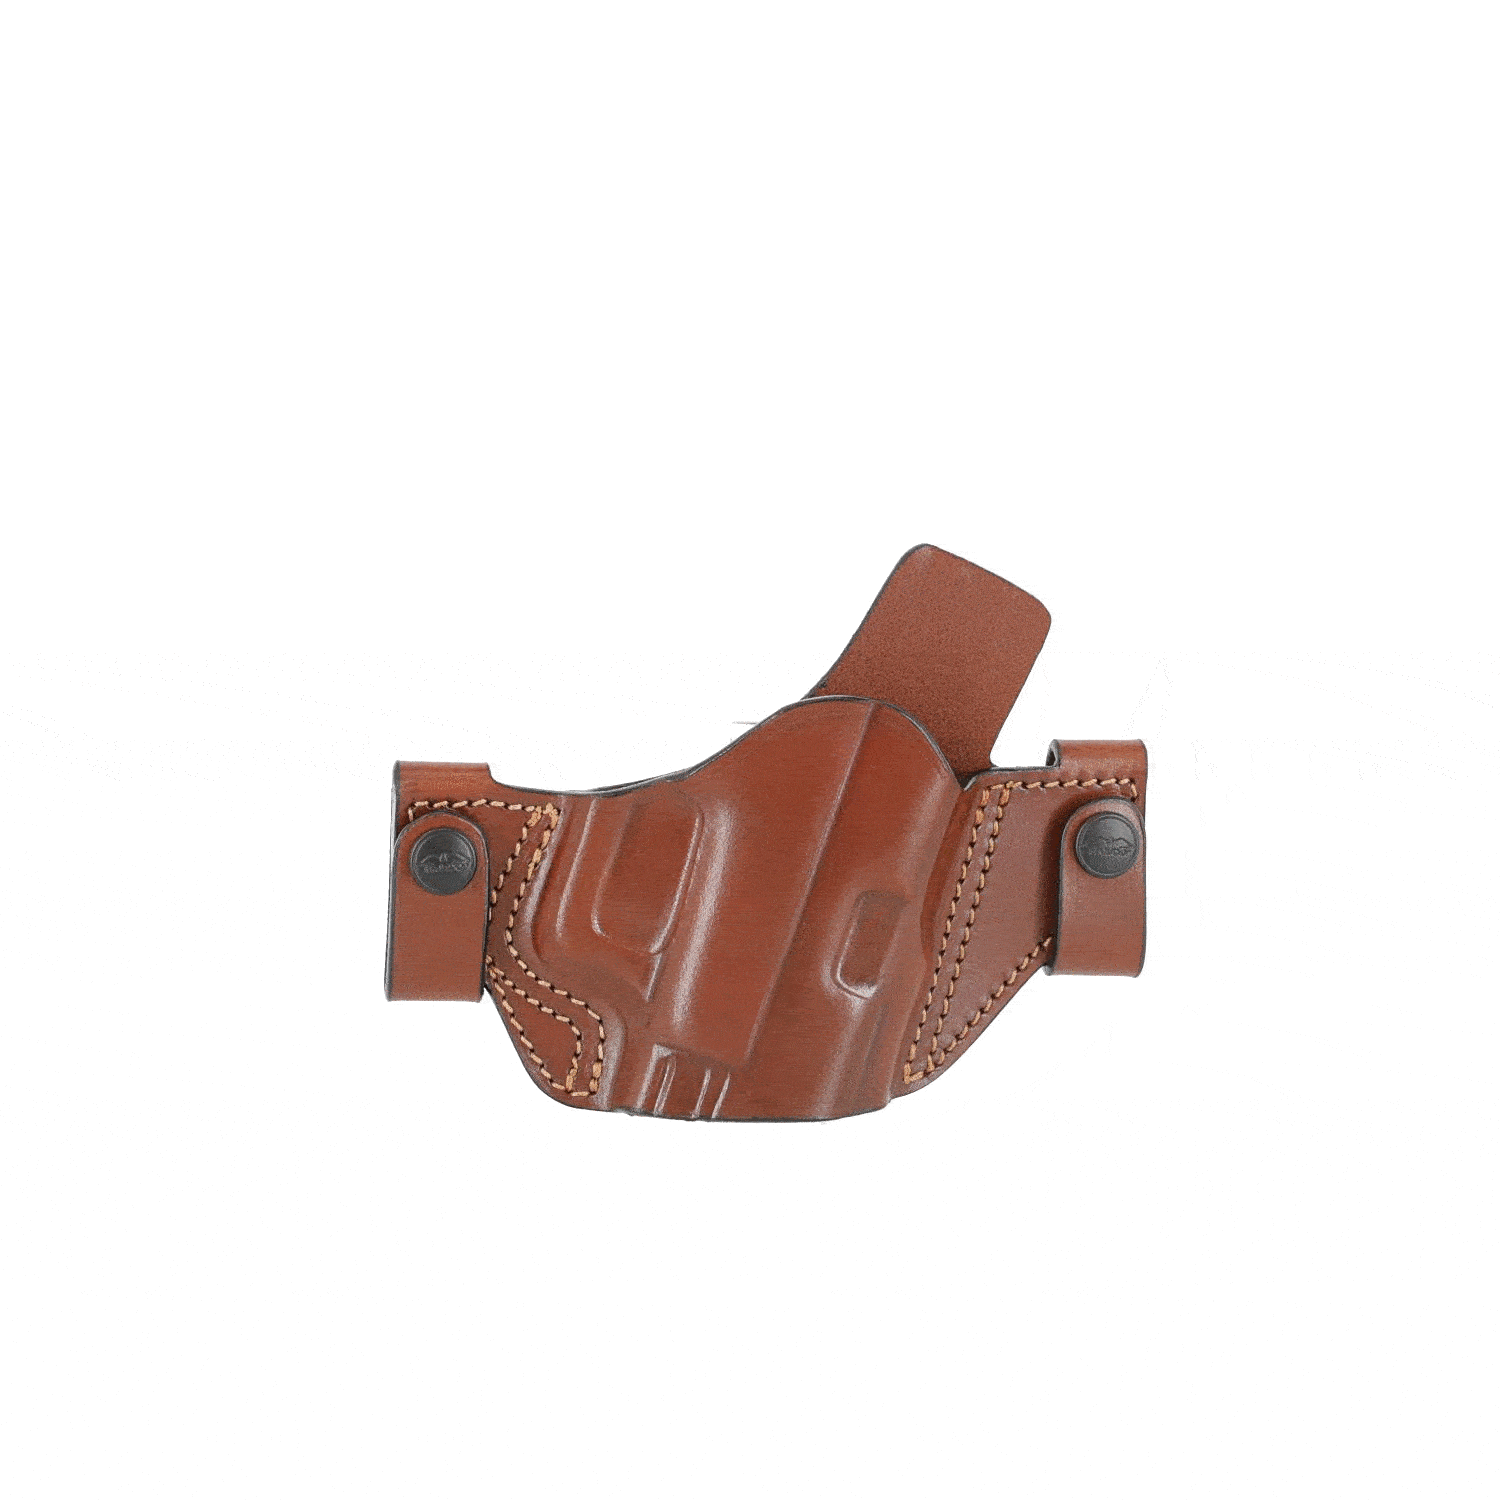 Easy on open top open barrel OWB leather holster